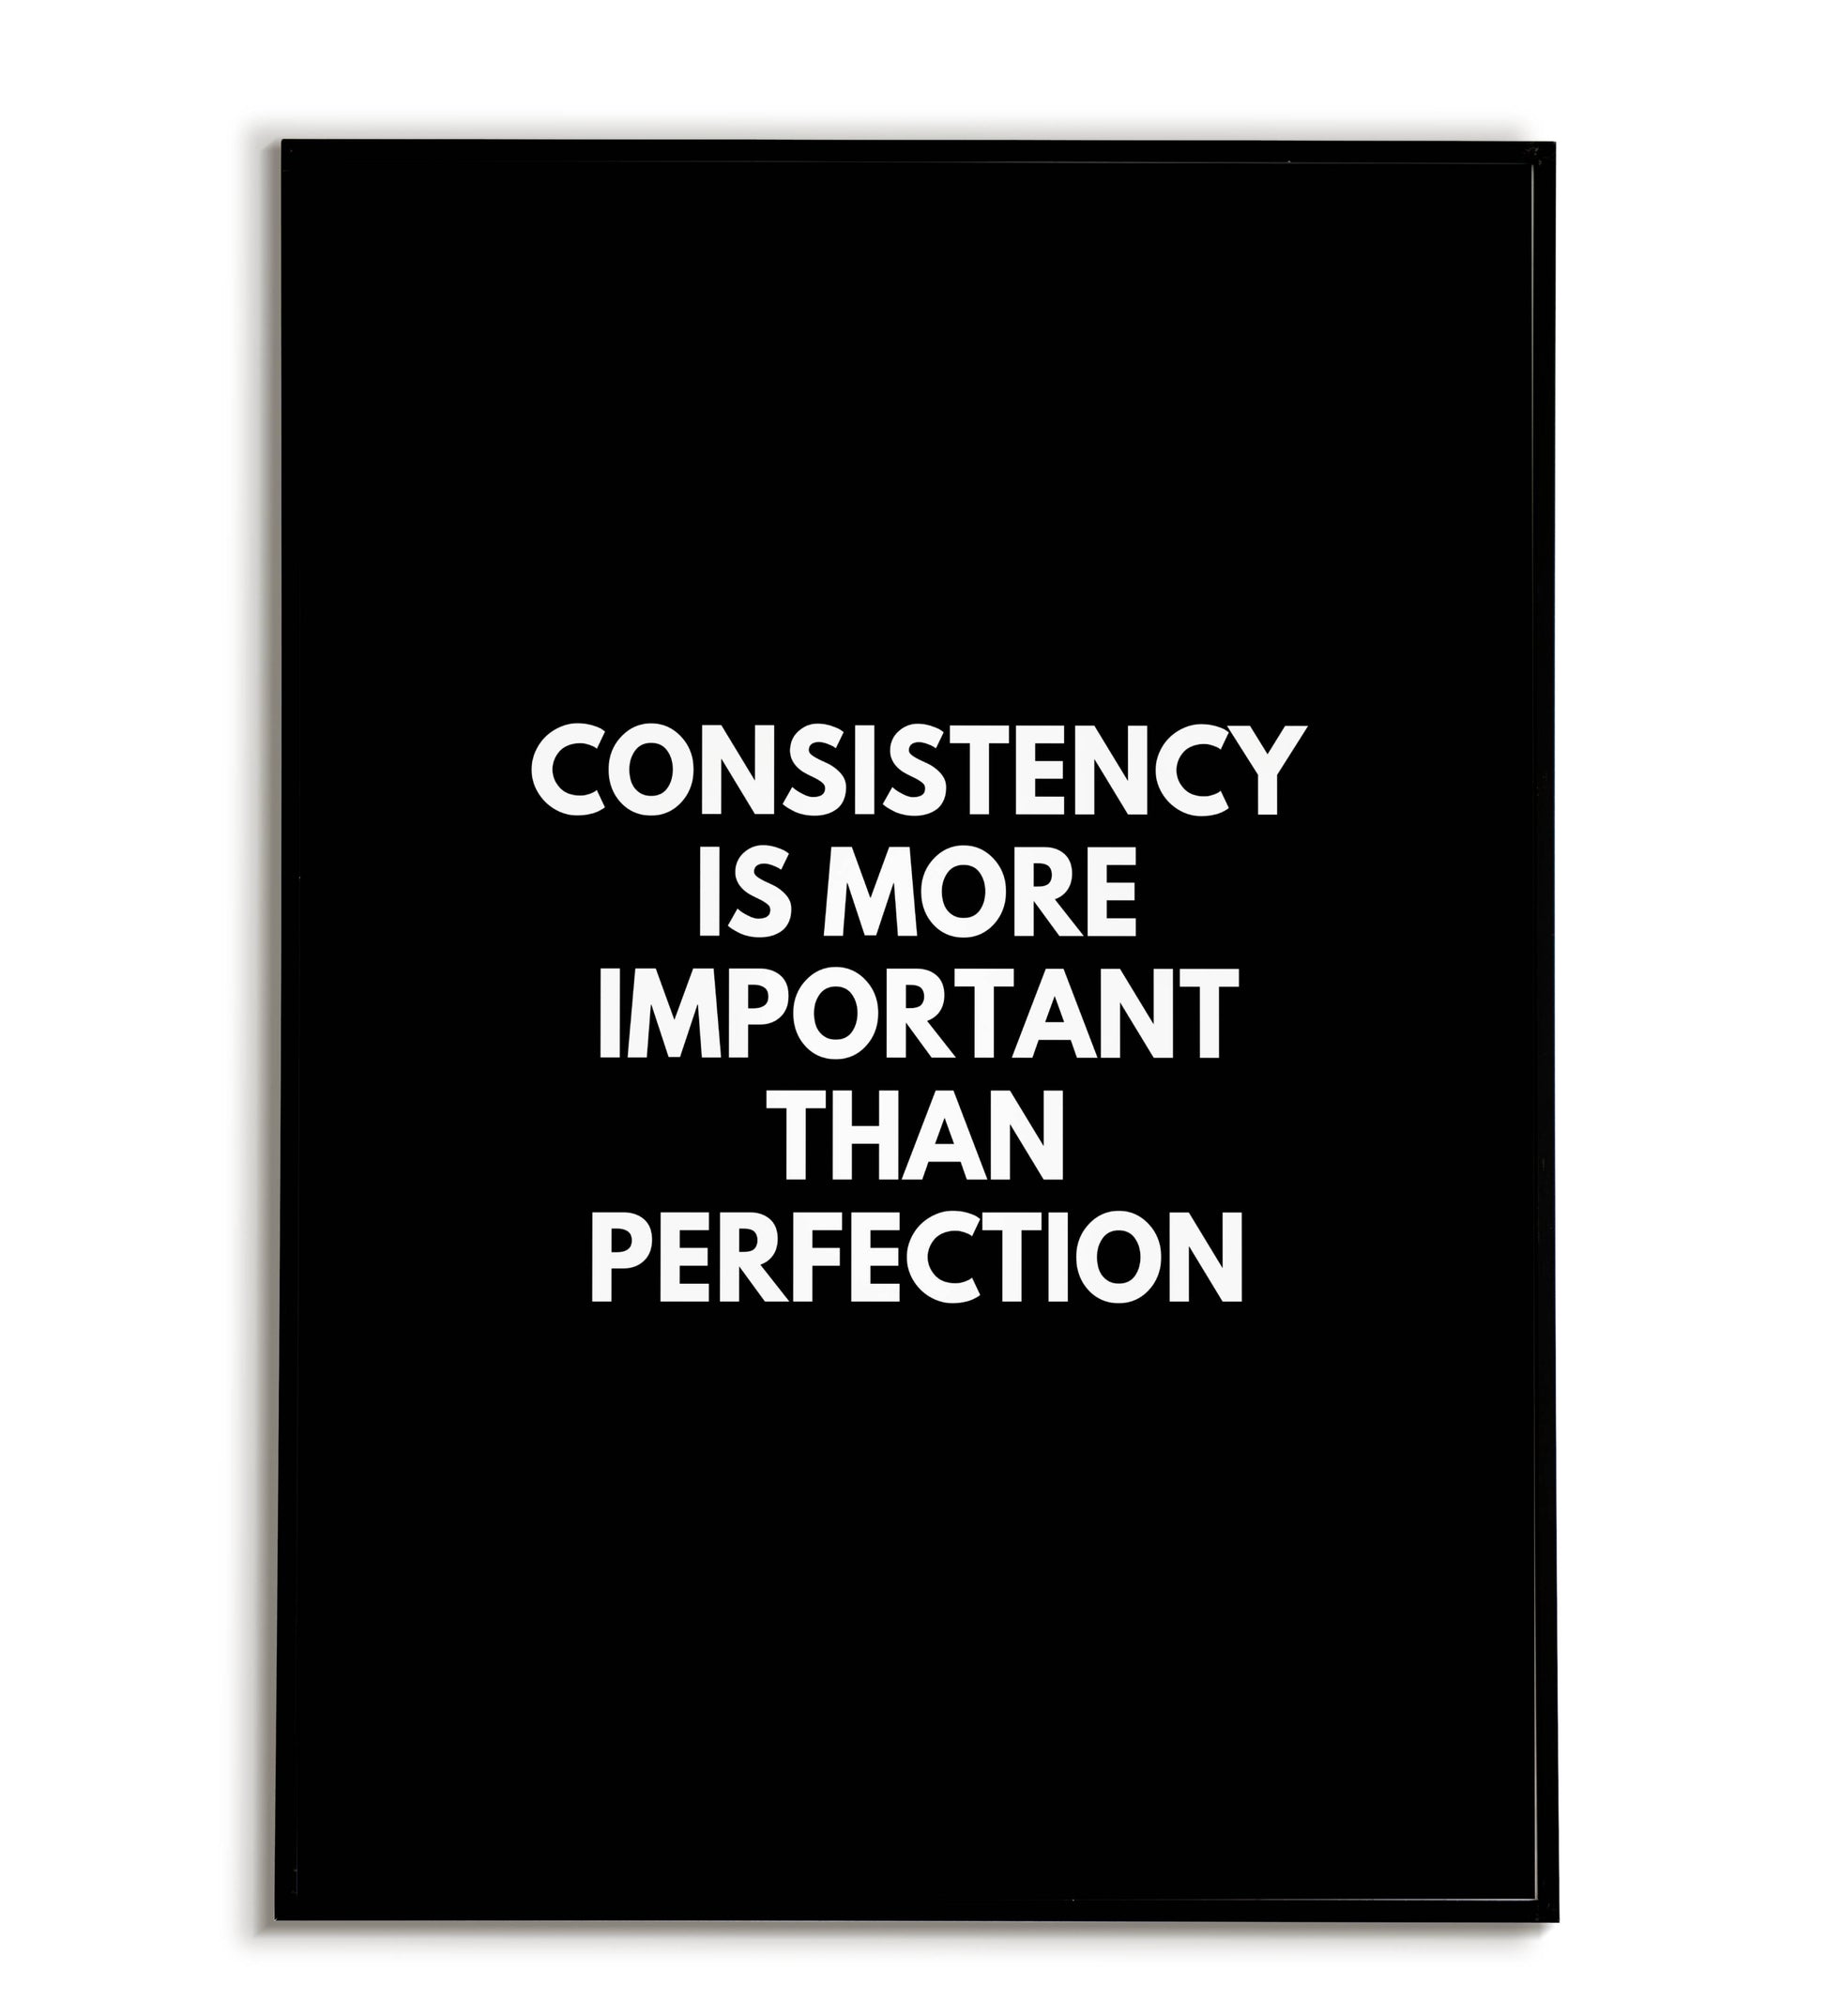 "Consistency is more important than perfection" - Printable Wall Art / Poster. Download this motivational quote to keep you focused on progress.